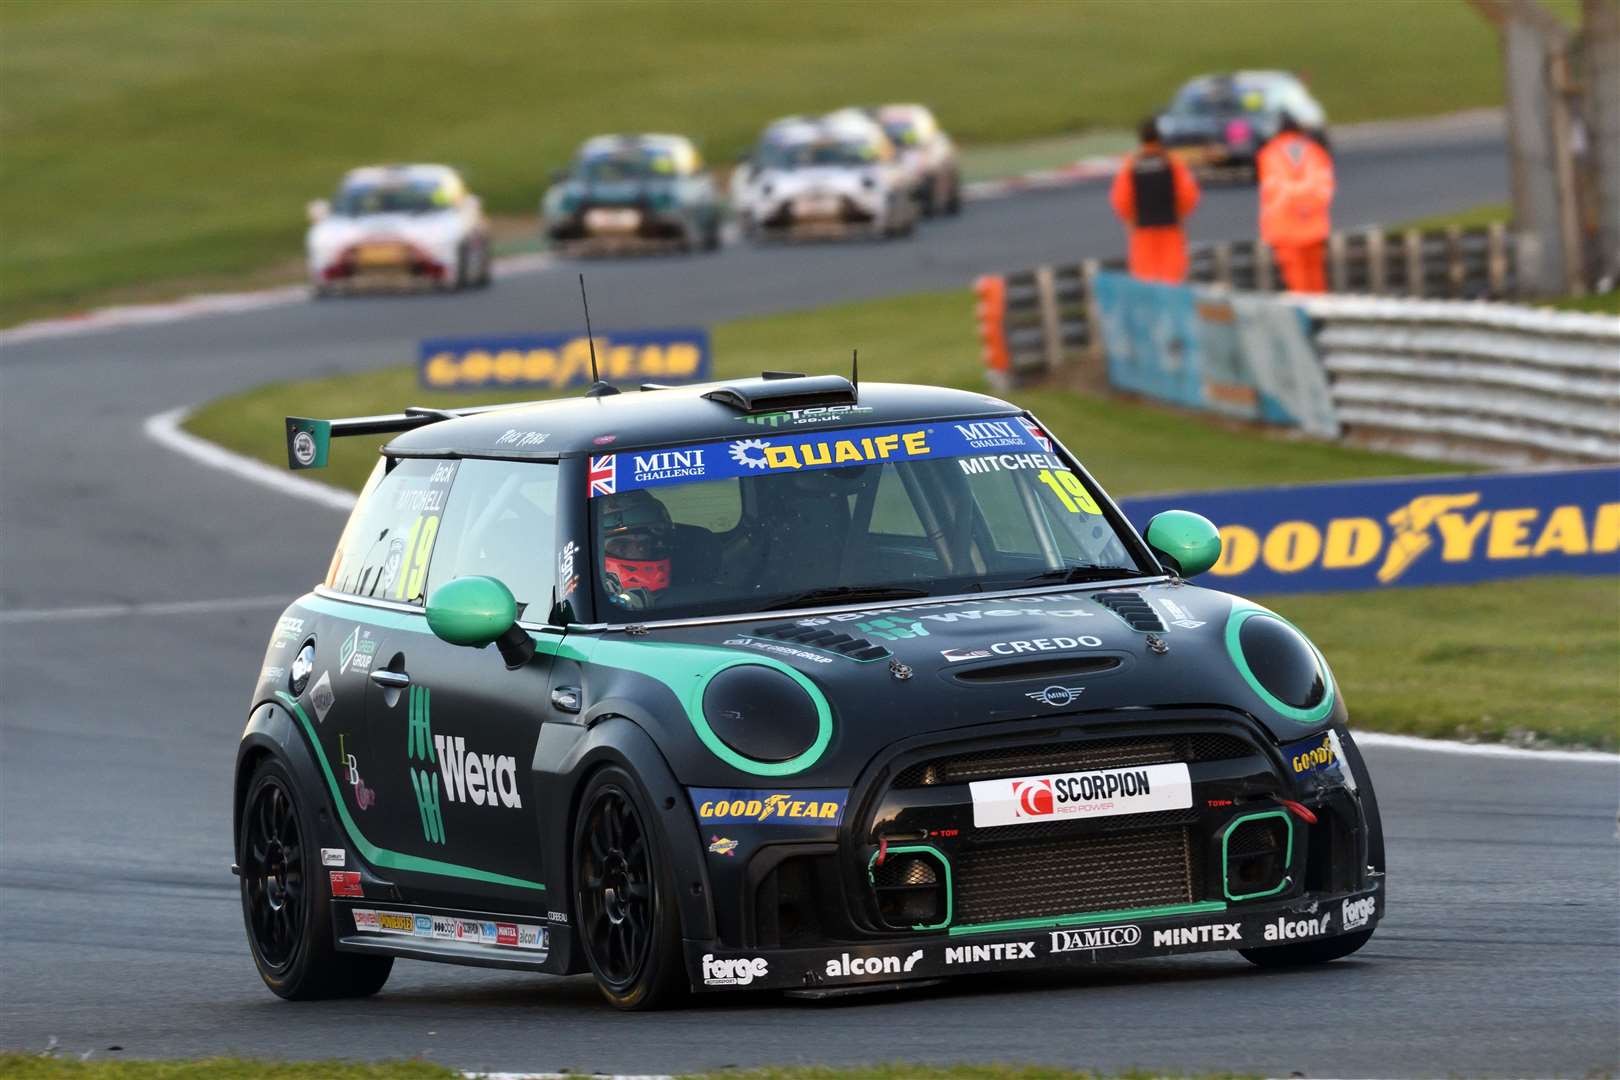 Mitchell took two second-place finishes and a third in the Mini Challenge. Meanwhile, his former BTCC squad Team Hard, based in Detling, won the Jack Sears Trophy with Essex-based racer Bobby Thompson